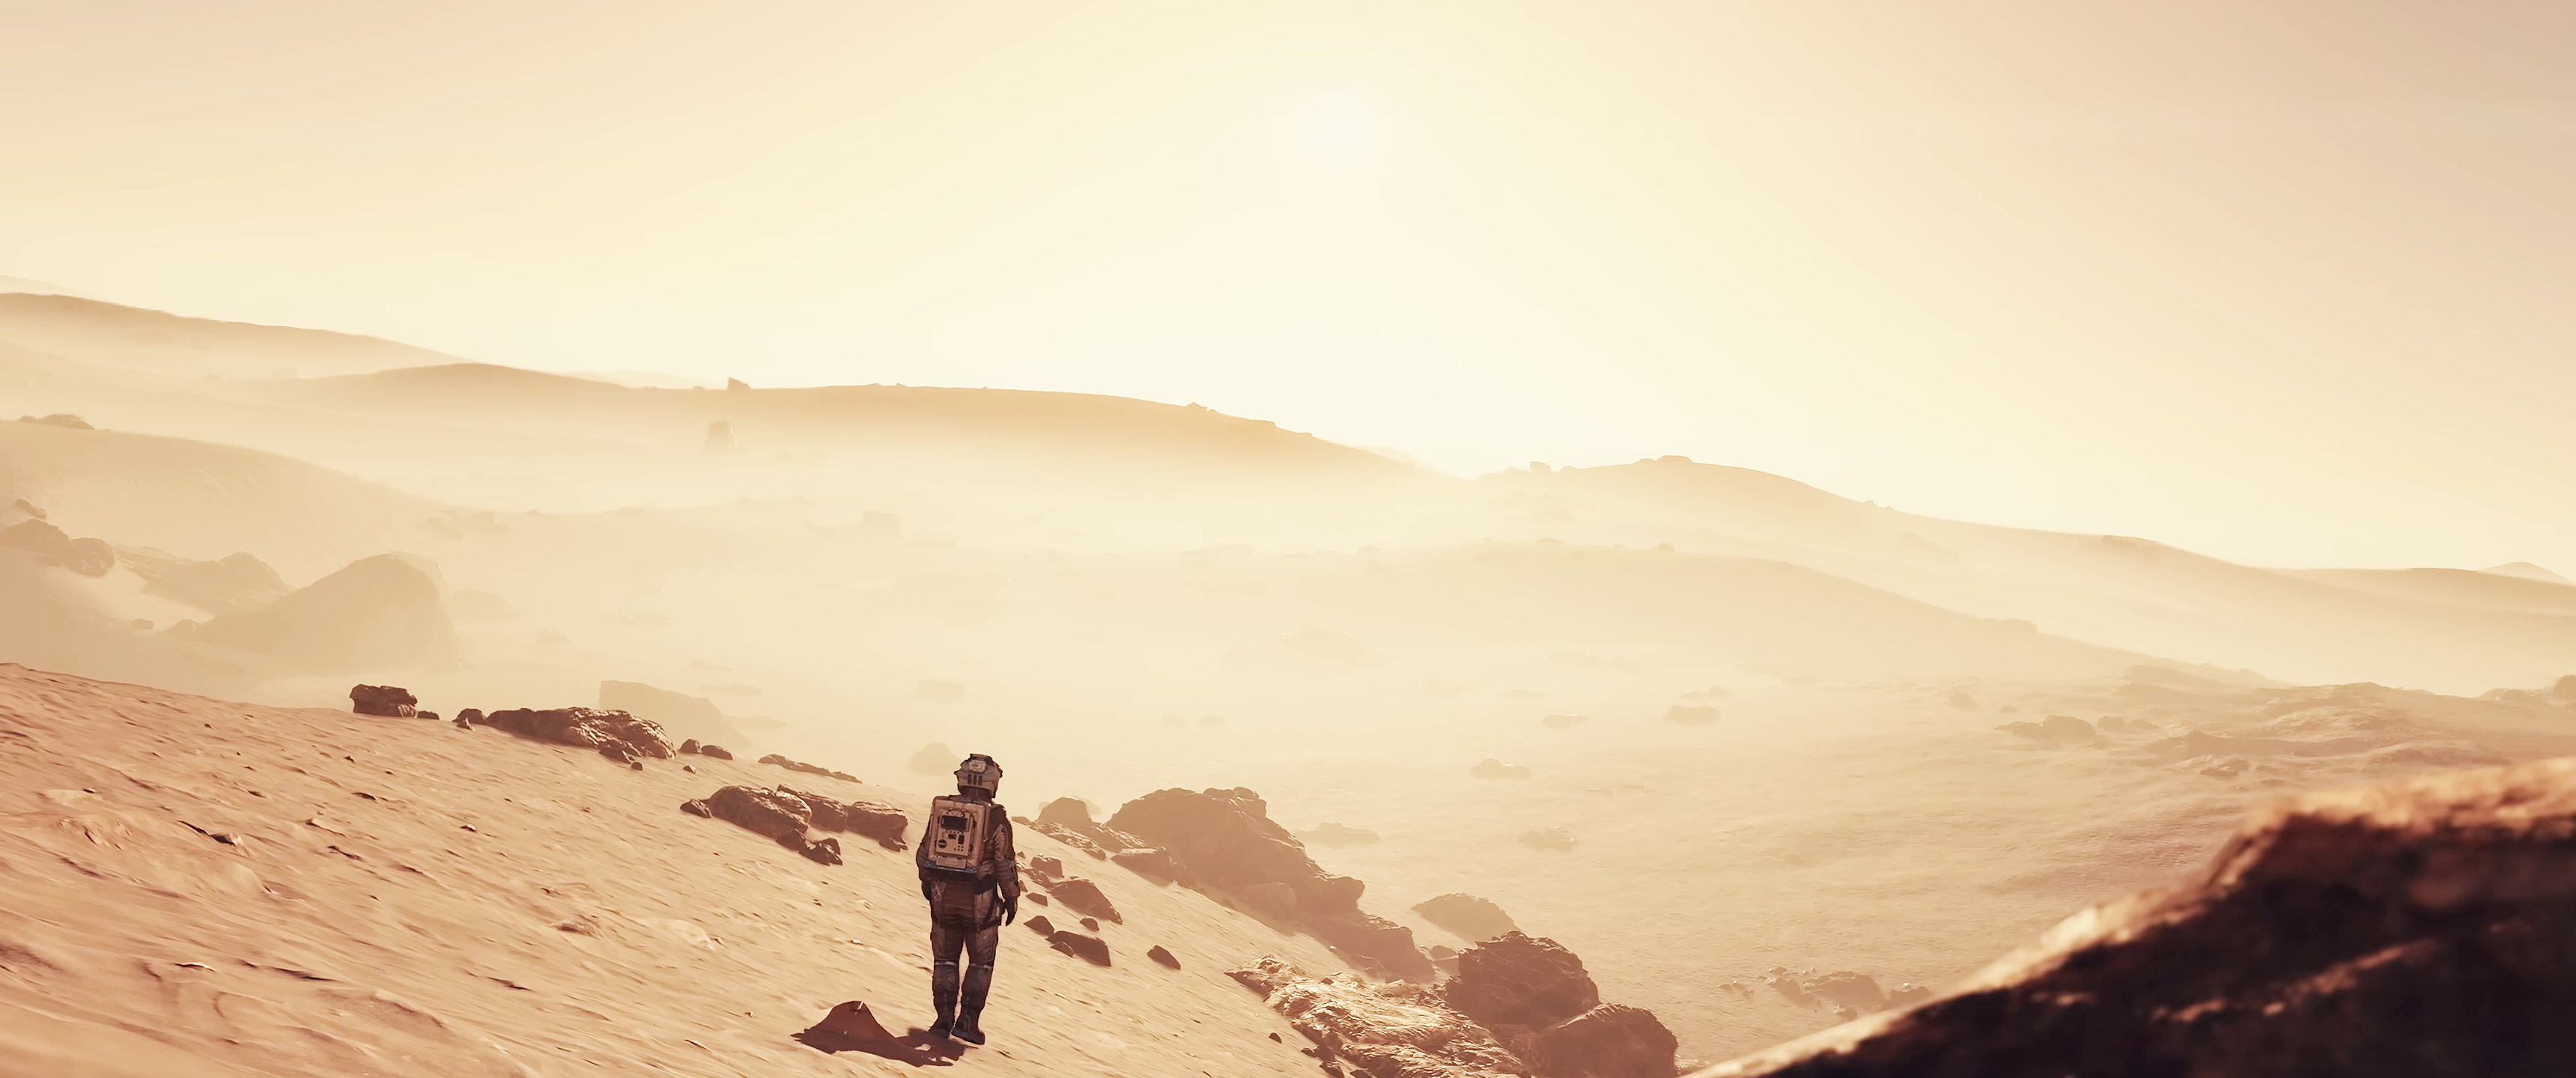 General 3440x1440 Starfield (video game) Bethesda Softworks space spacesuit video game characters desolate desert video games landscape video game art rocks sand